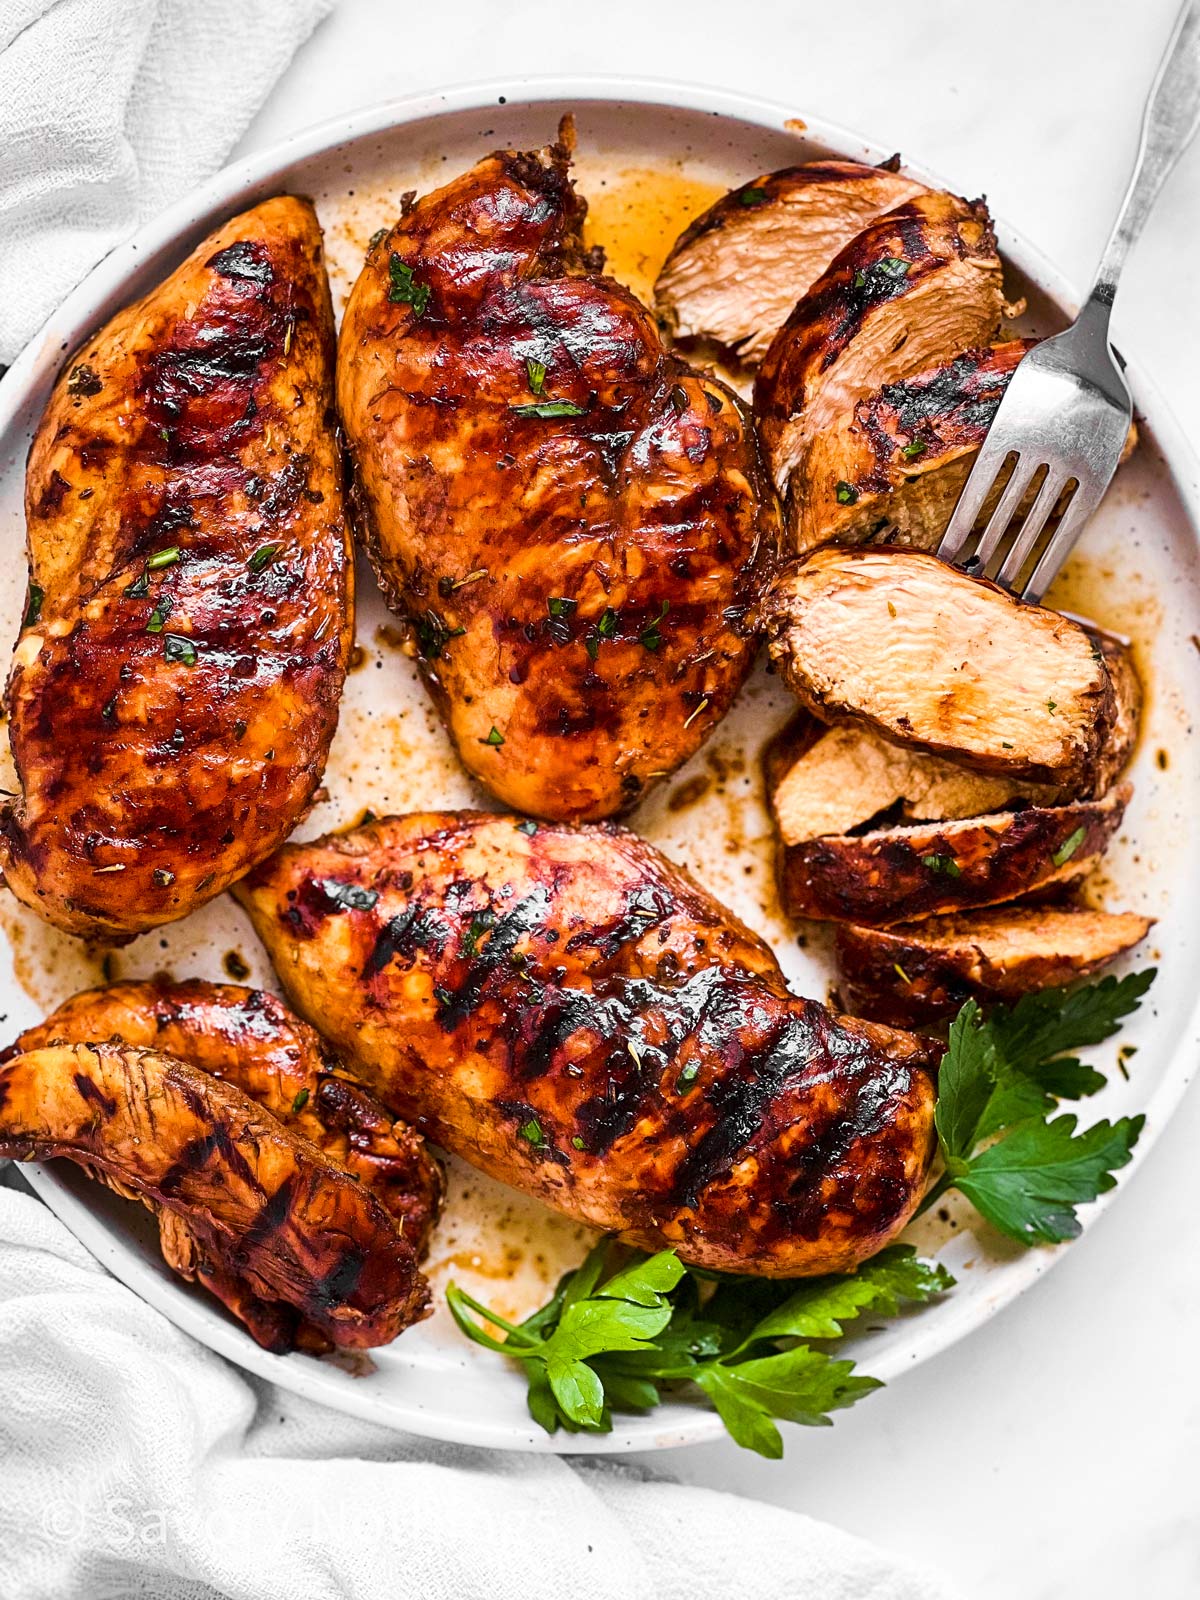 overhead view of four grilled balsamic chicken breasts, one sliced, on white plate